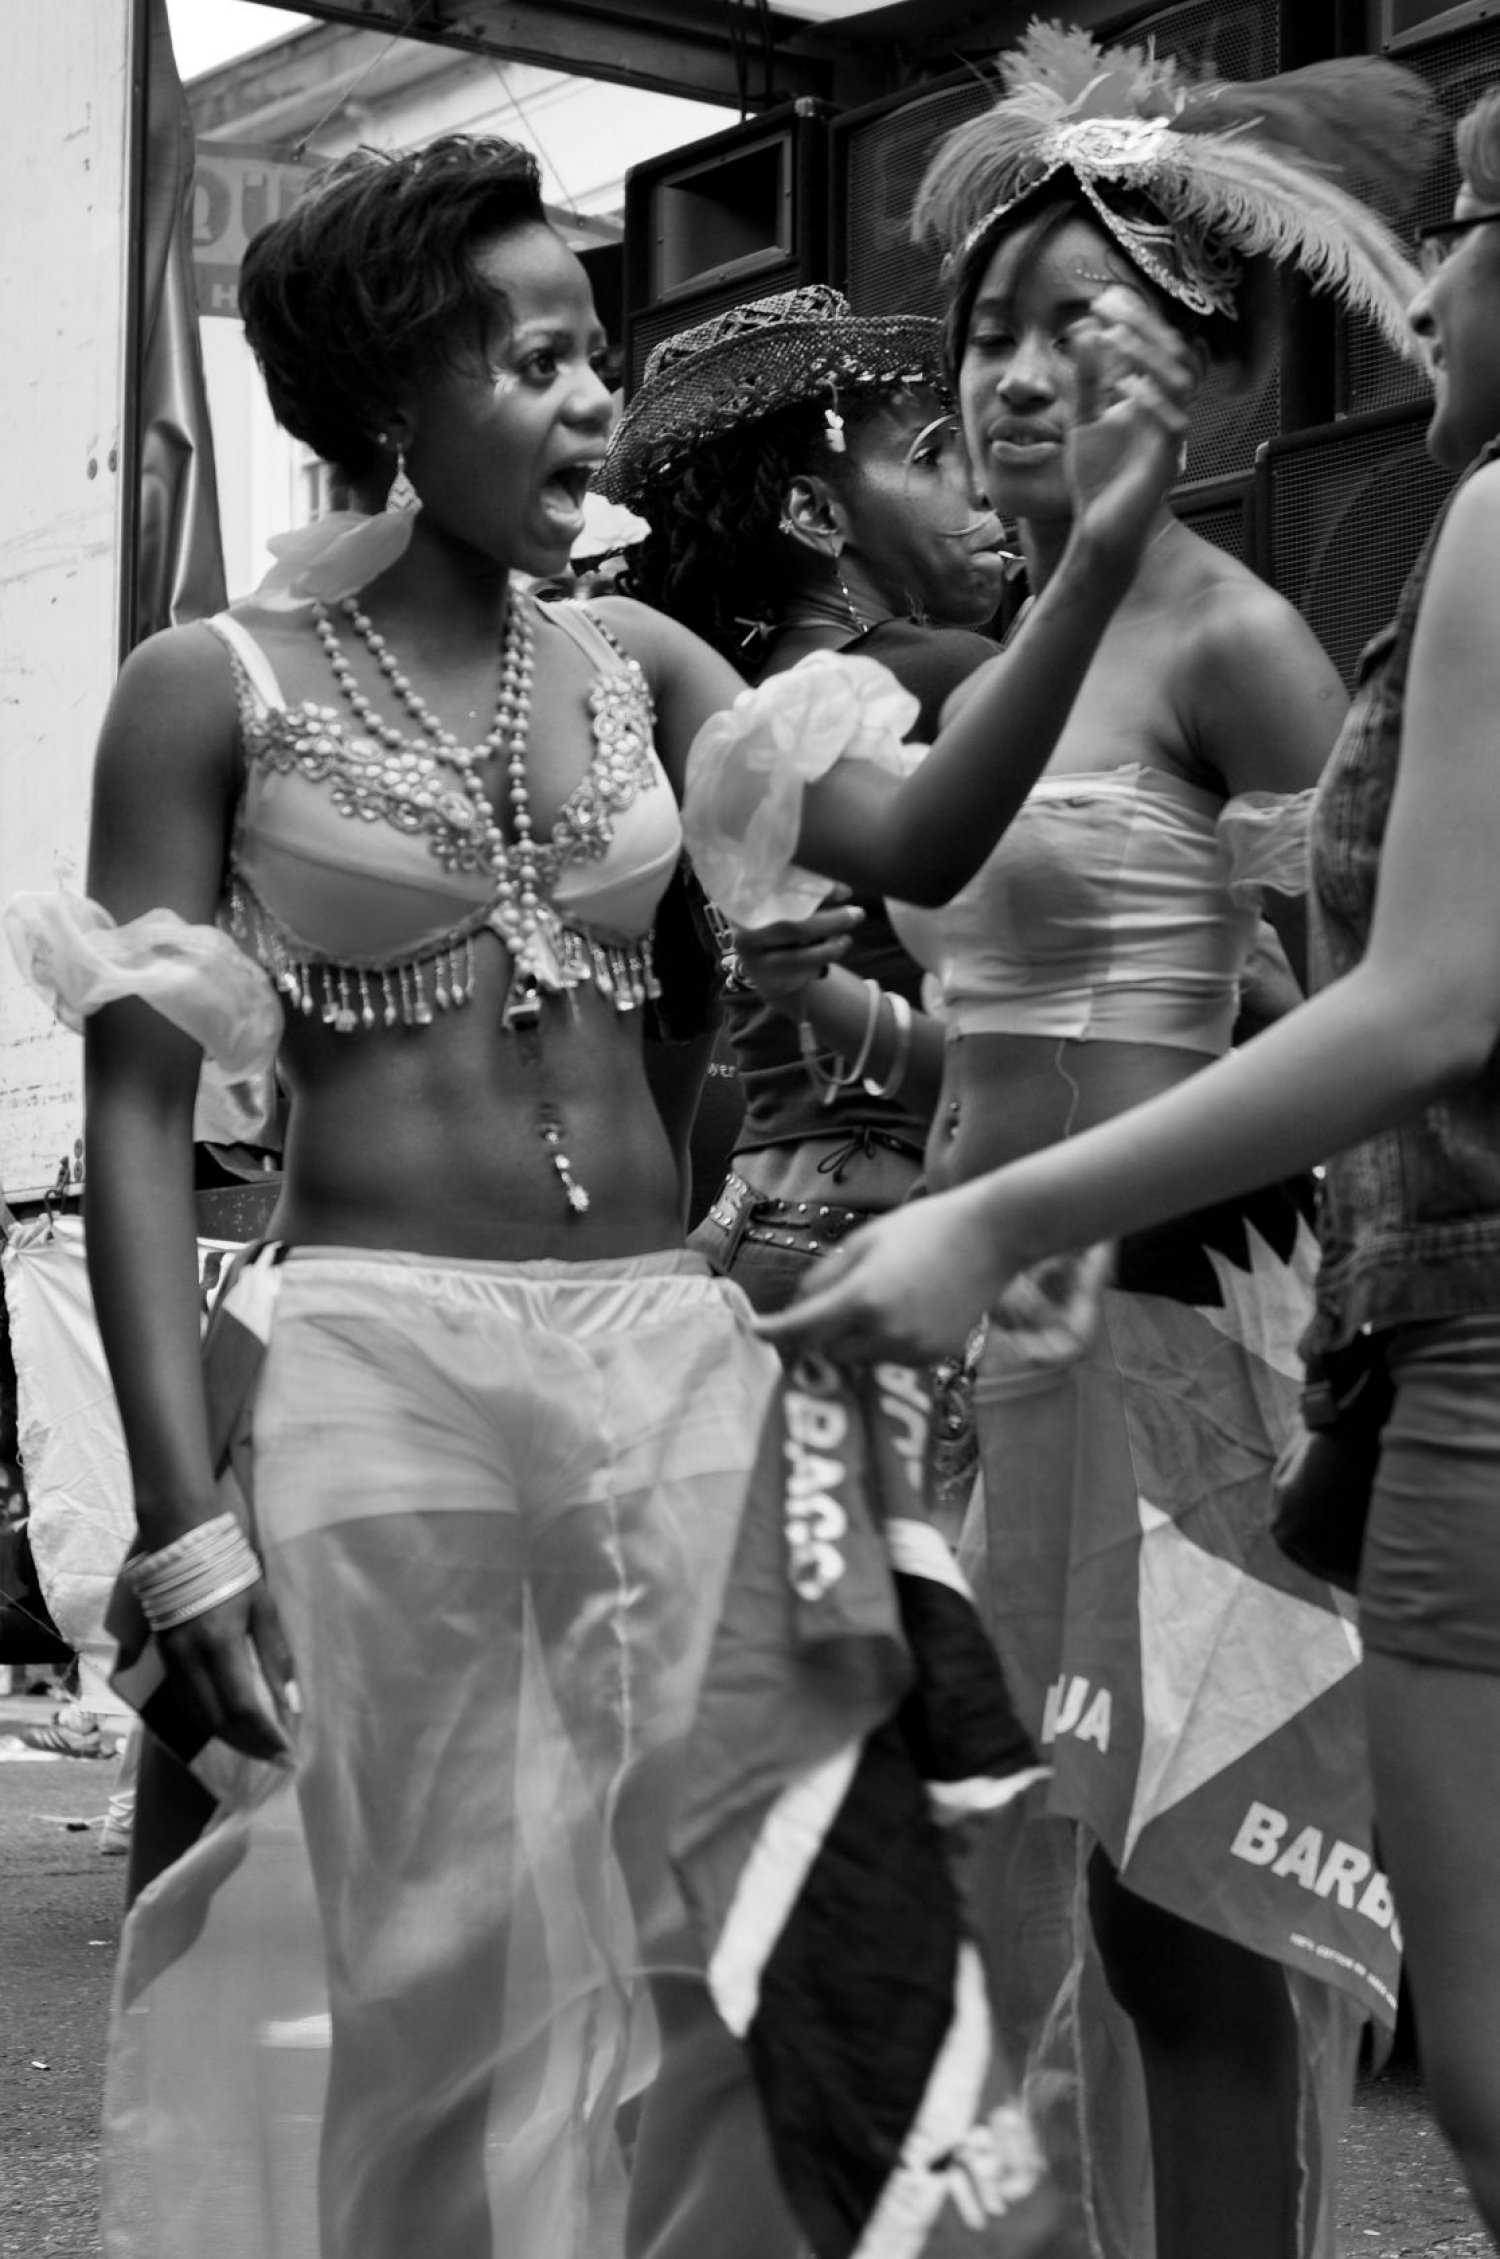 The Notting Hill Carnival